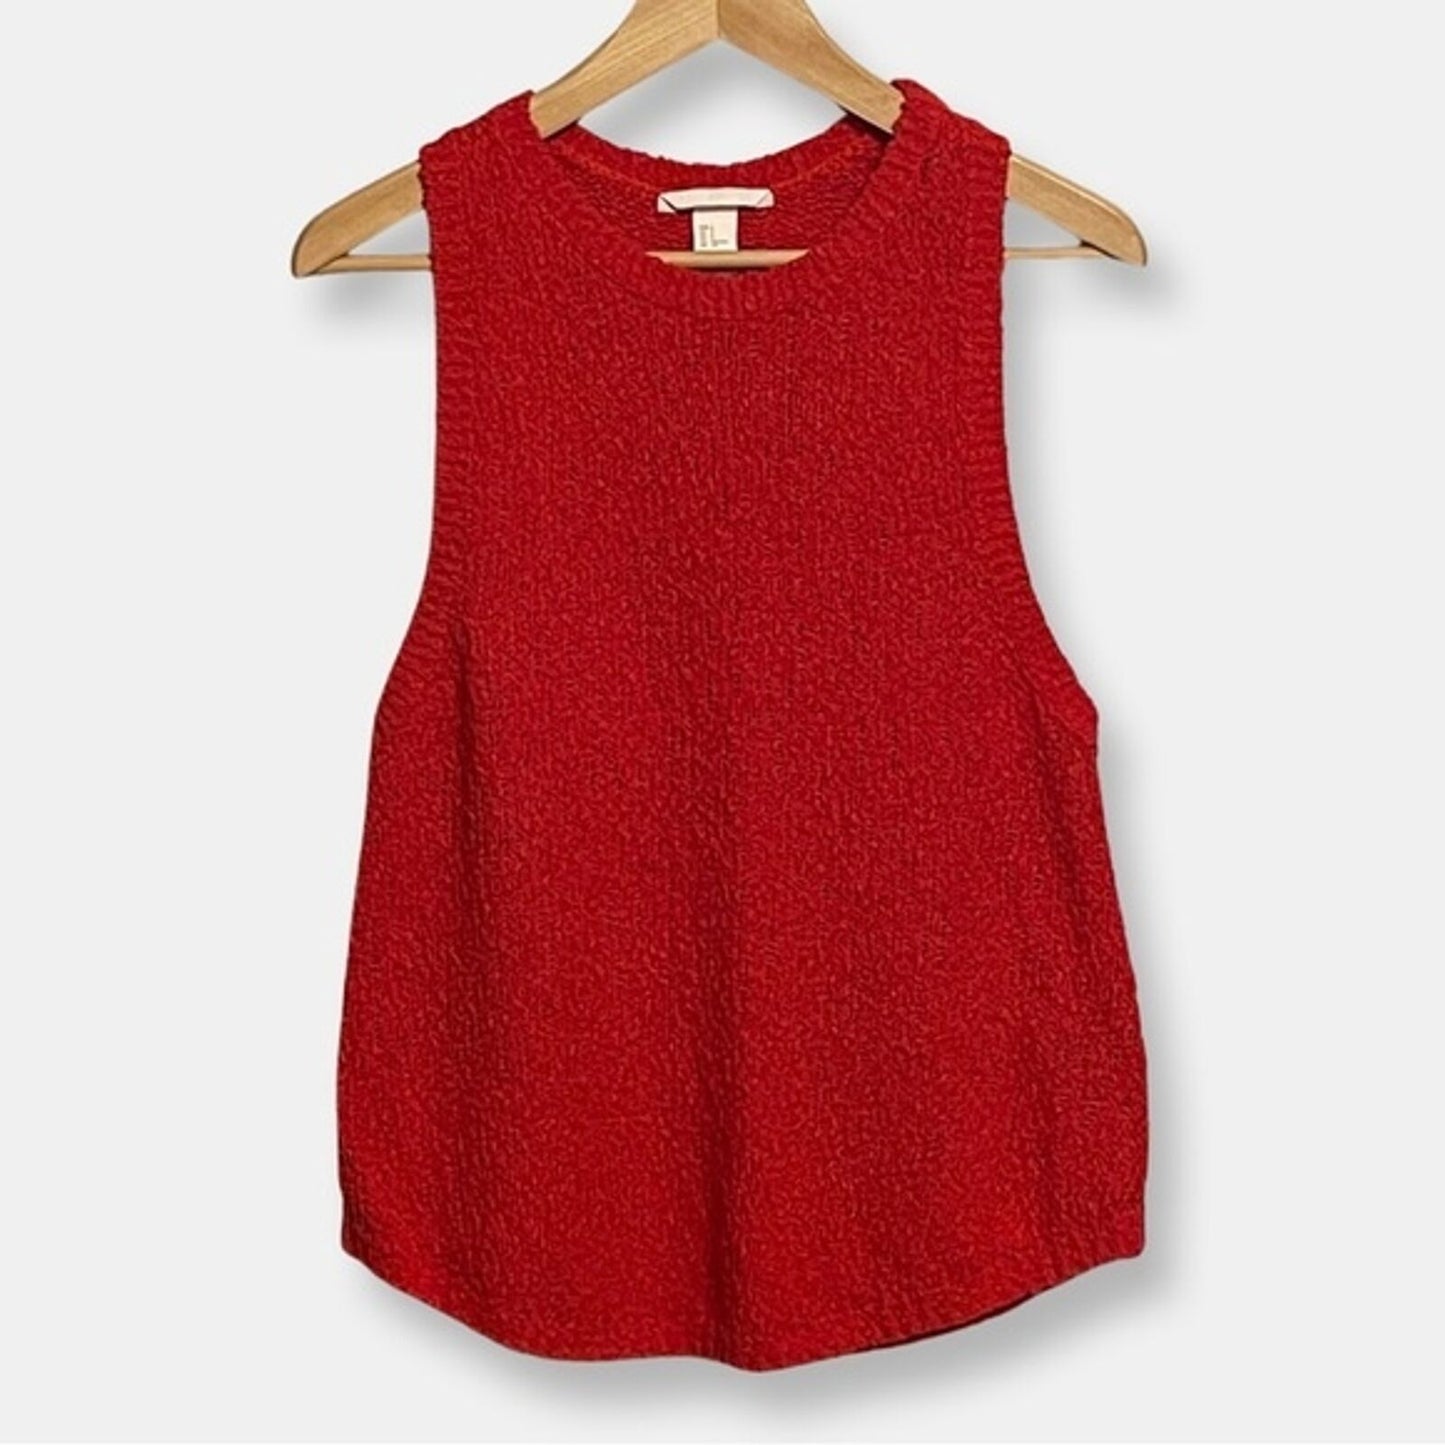 H&M Oversized Red Sweater Knit, Racer Back Tank Size Small Top